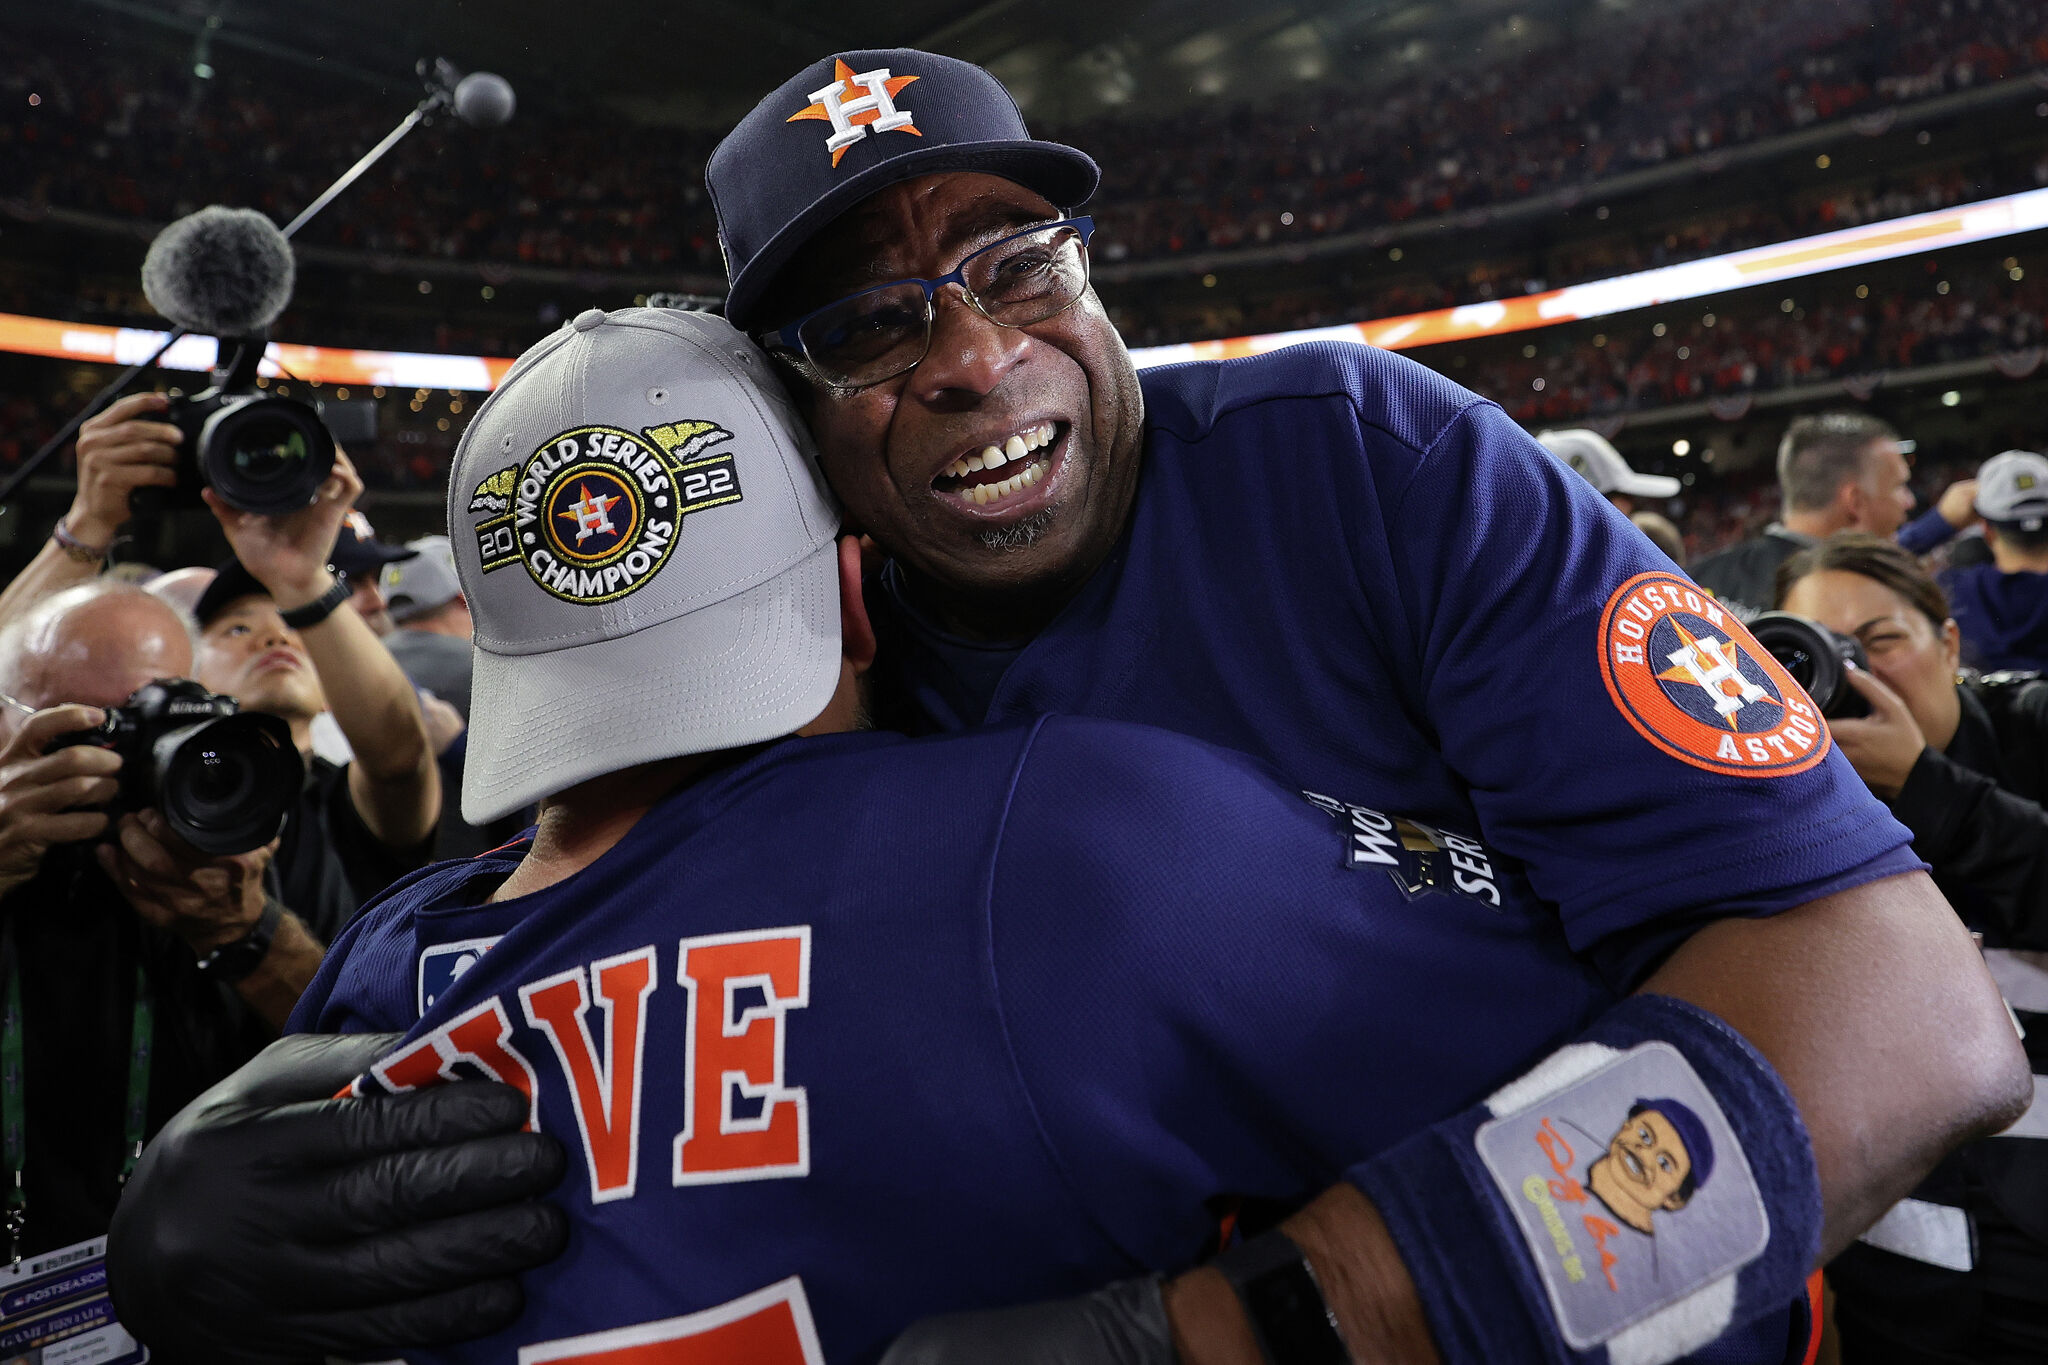 Dusty Baker reveals why he joined Astros amid scandal